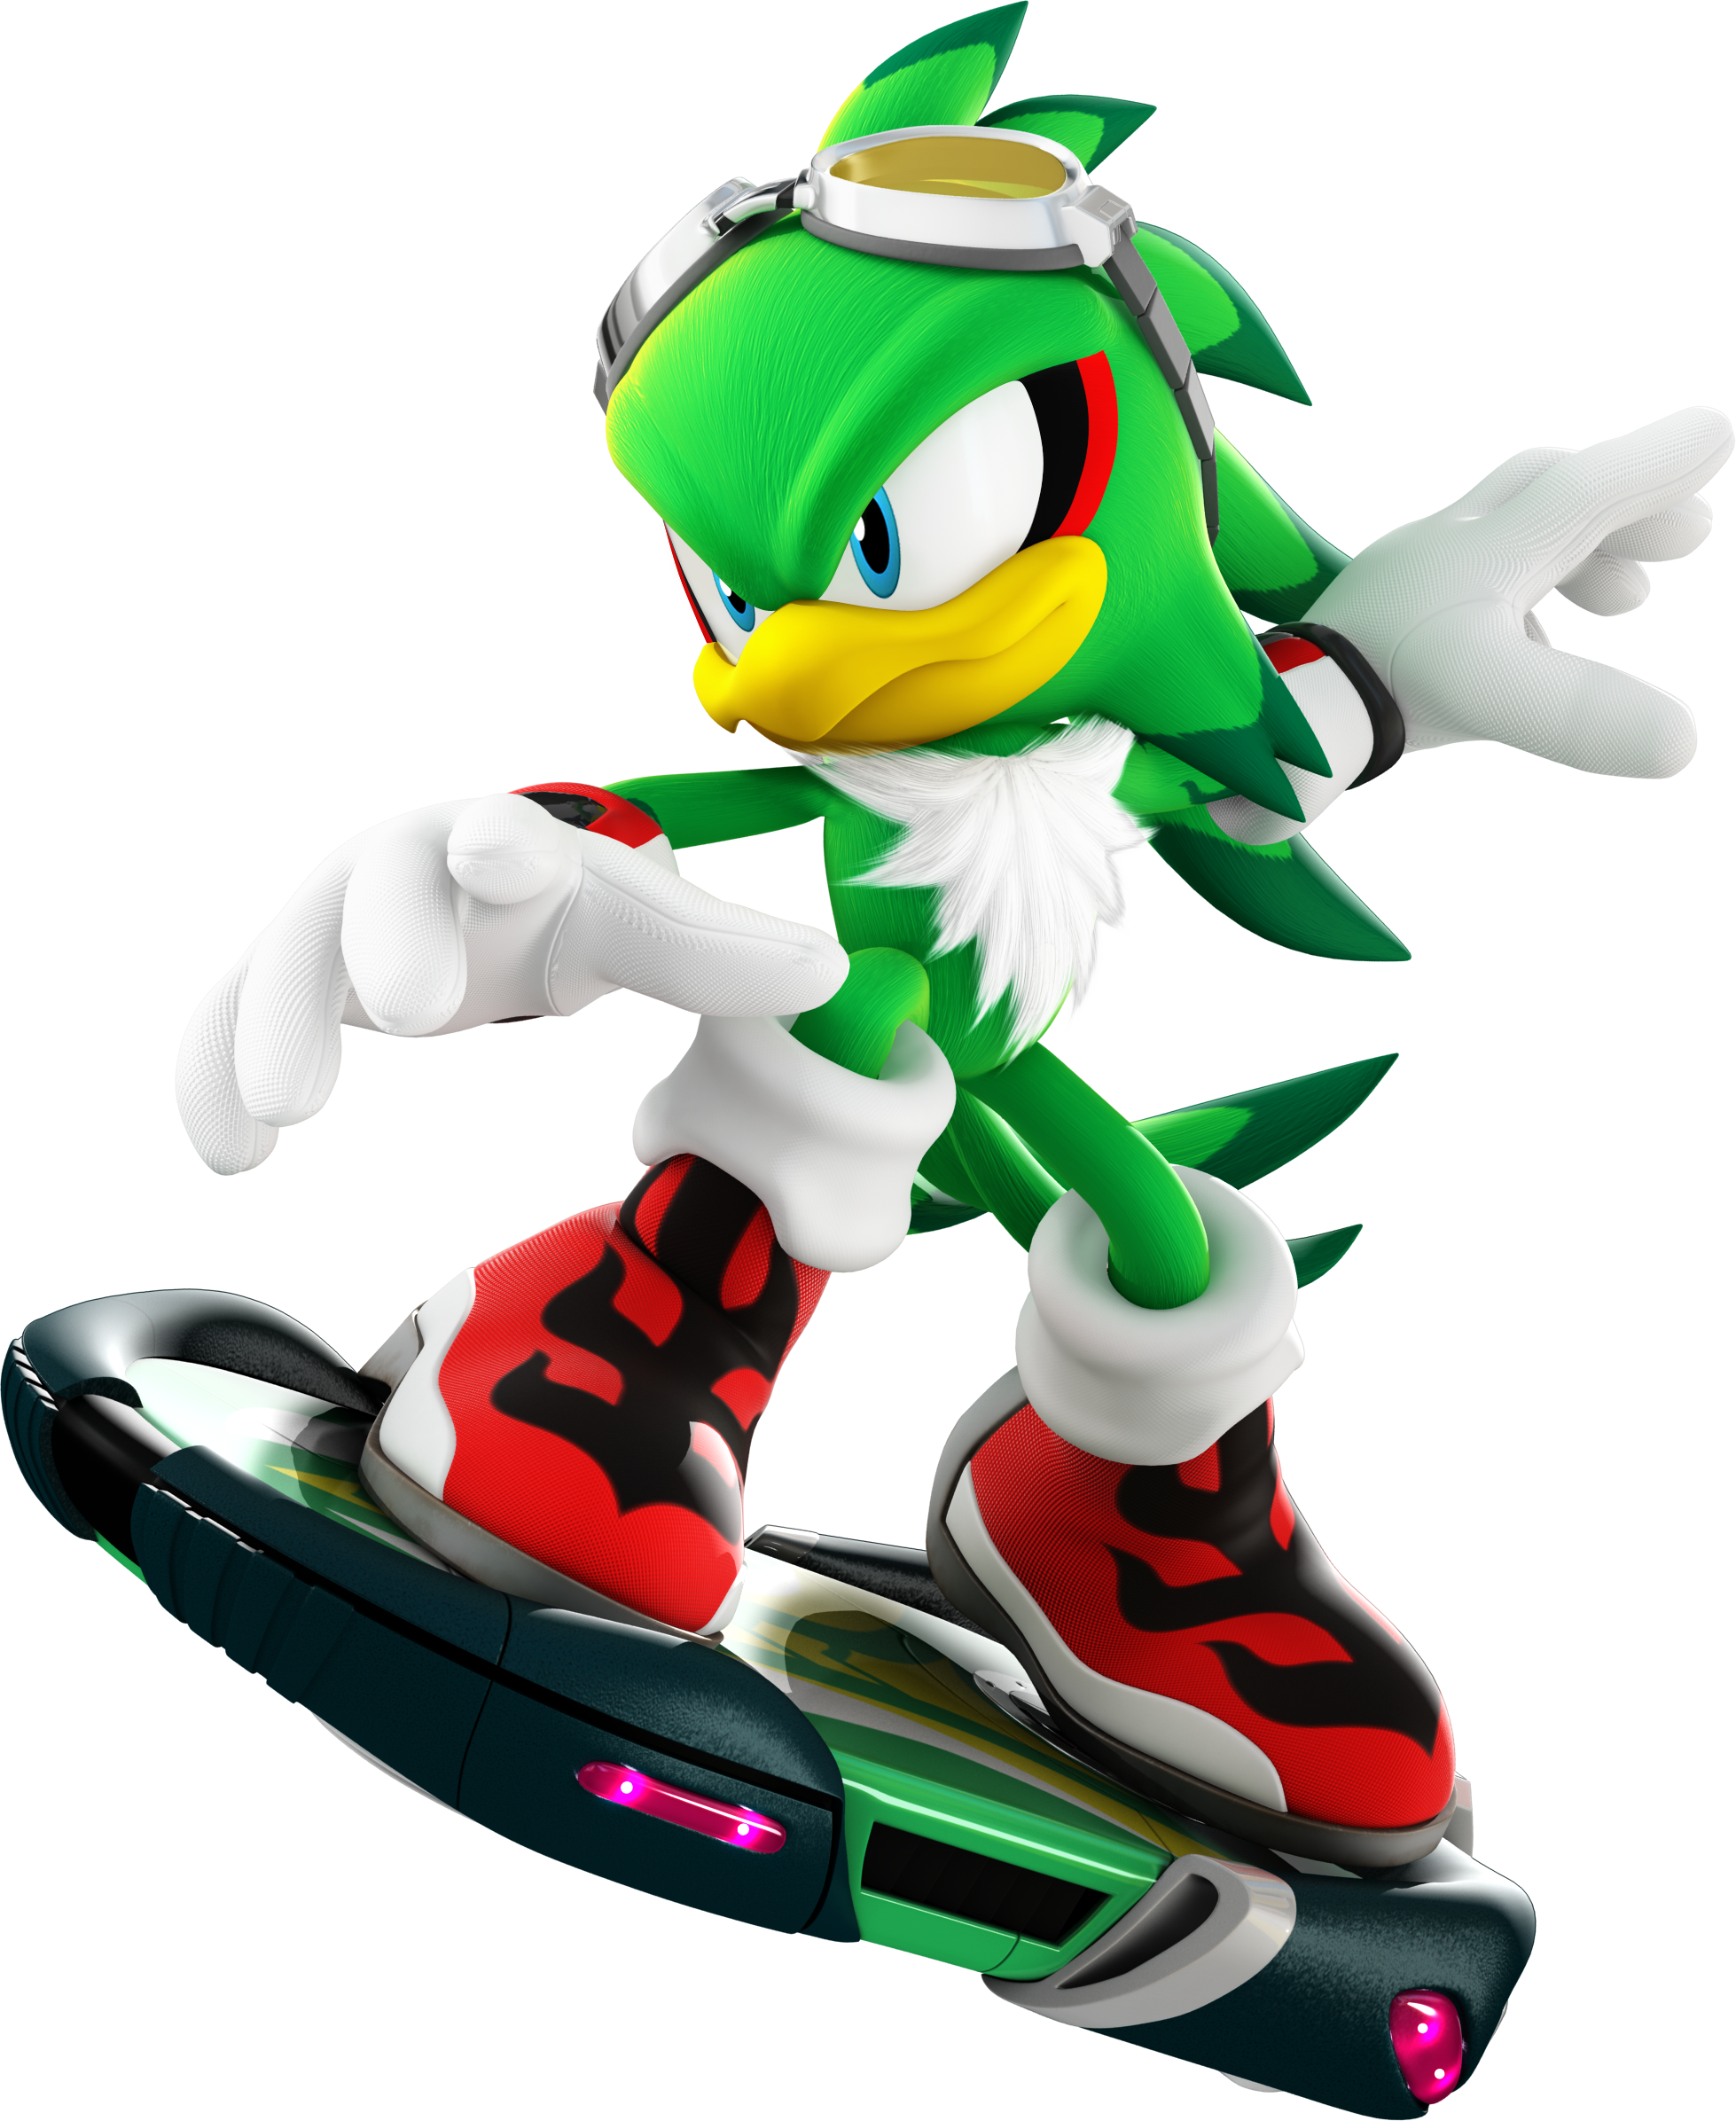 jet the hawk sonic free riders download free